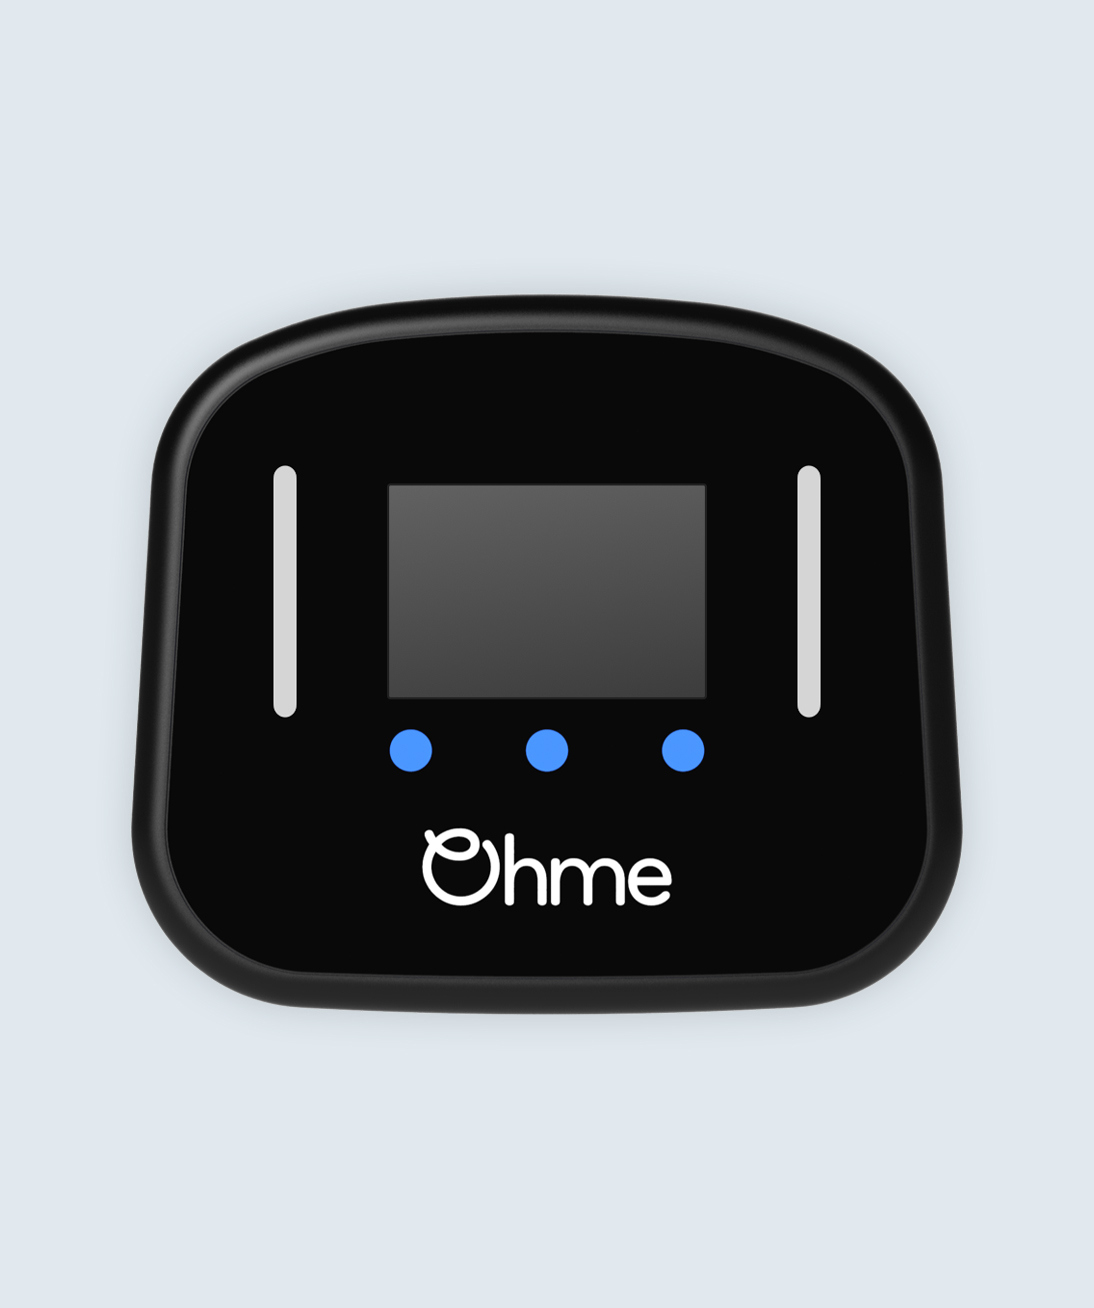 Ohme home pro with no lights illuminated